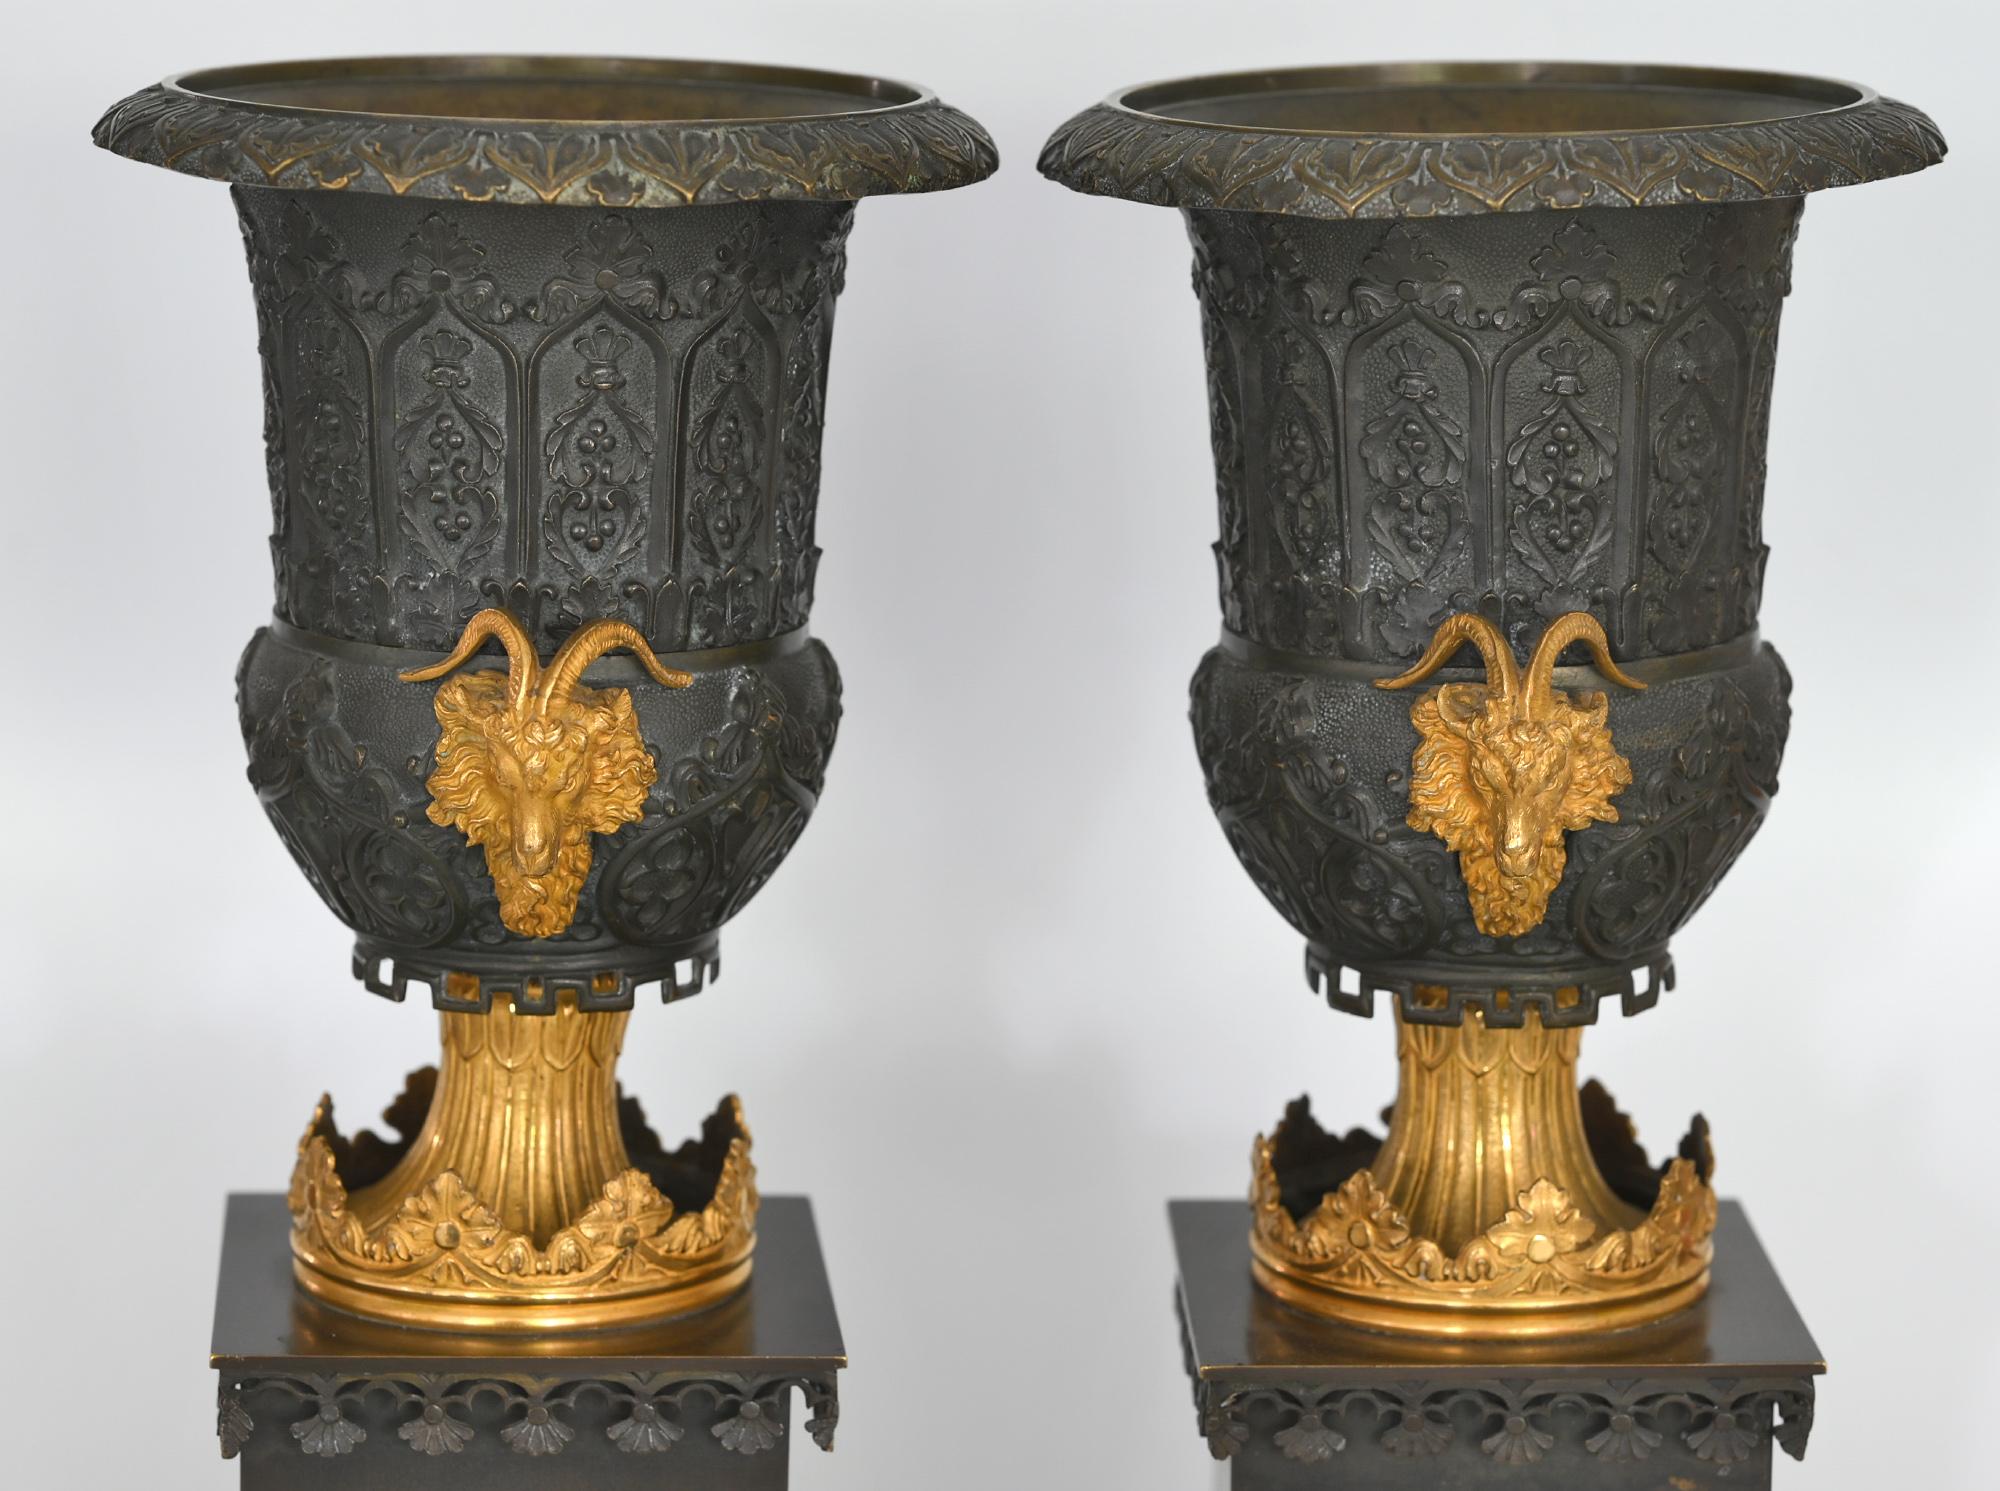 Gothic Revival Pair of Neo Gothic Vases Bronze, Gilt Bronze England 1830, Ram Heads For Sale